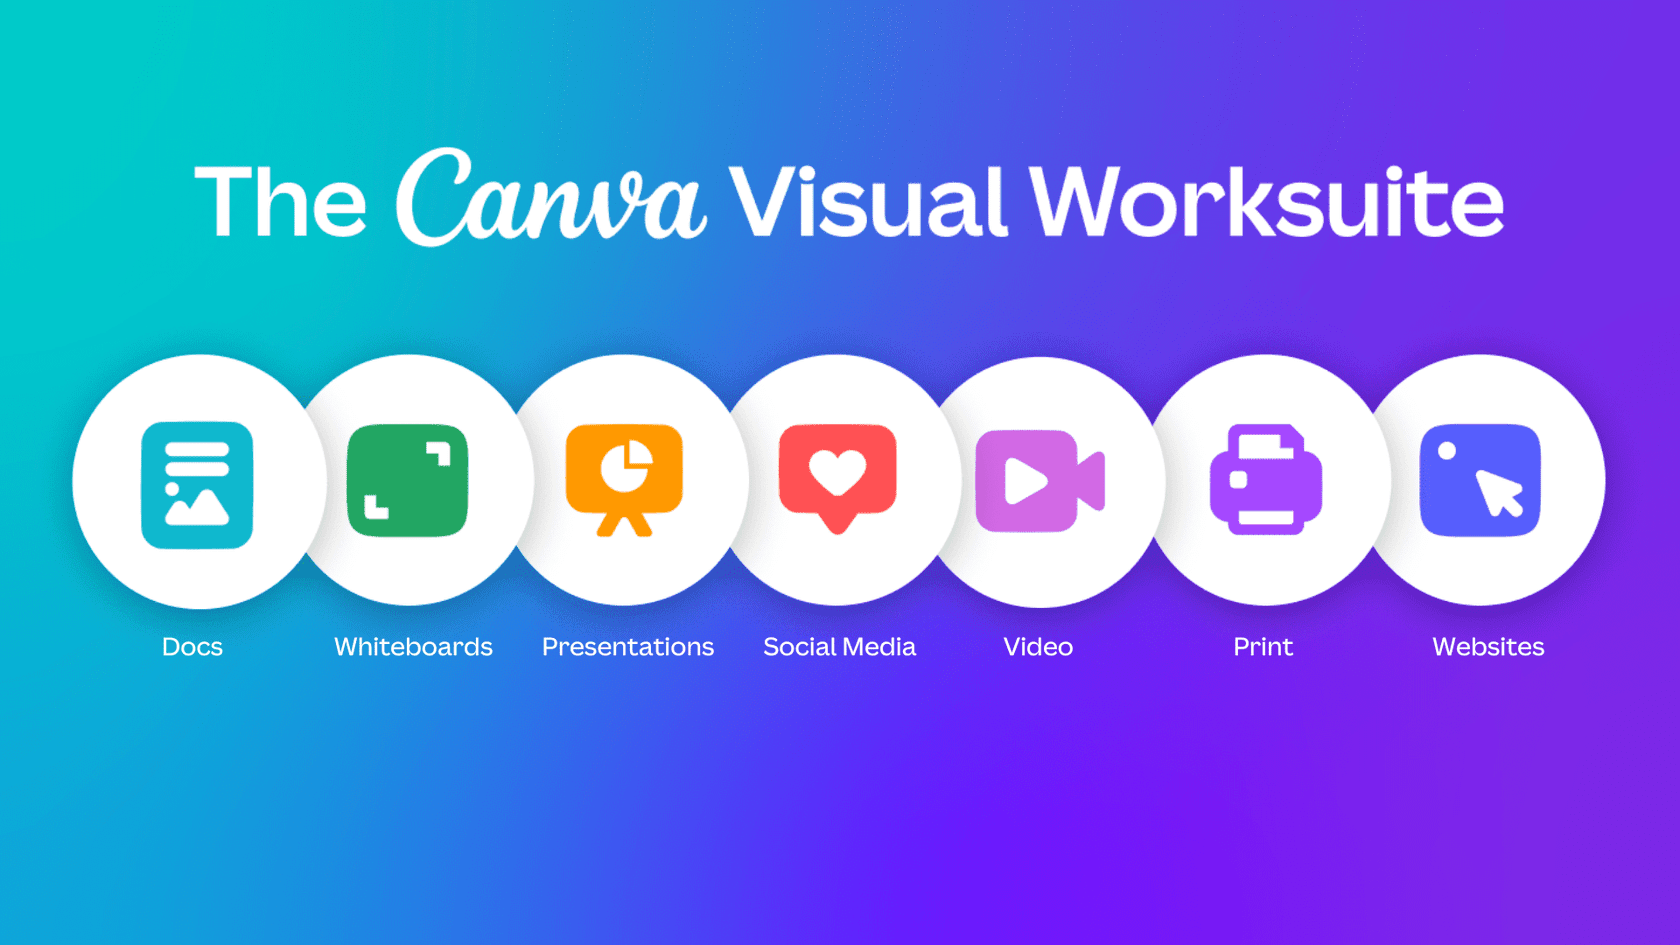 Canva, a visual content creation tool that has several personal uses